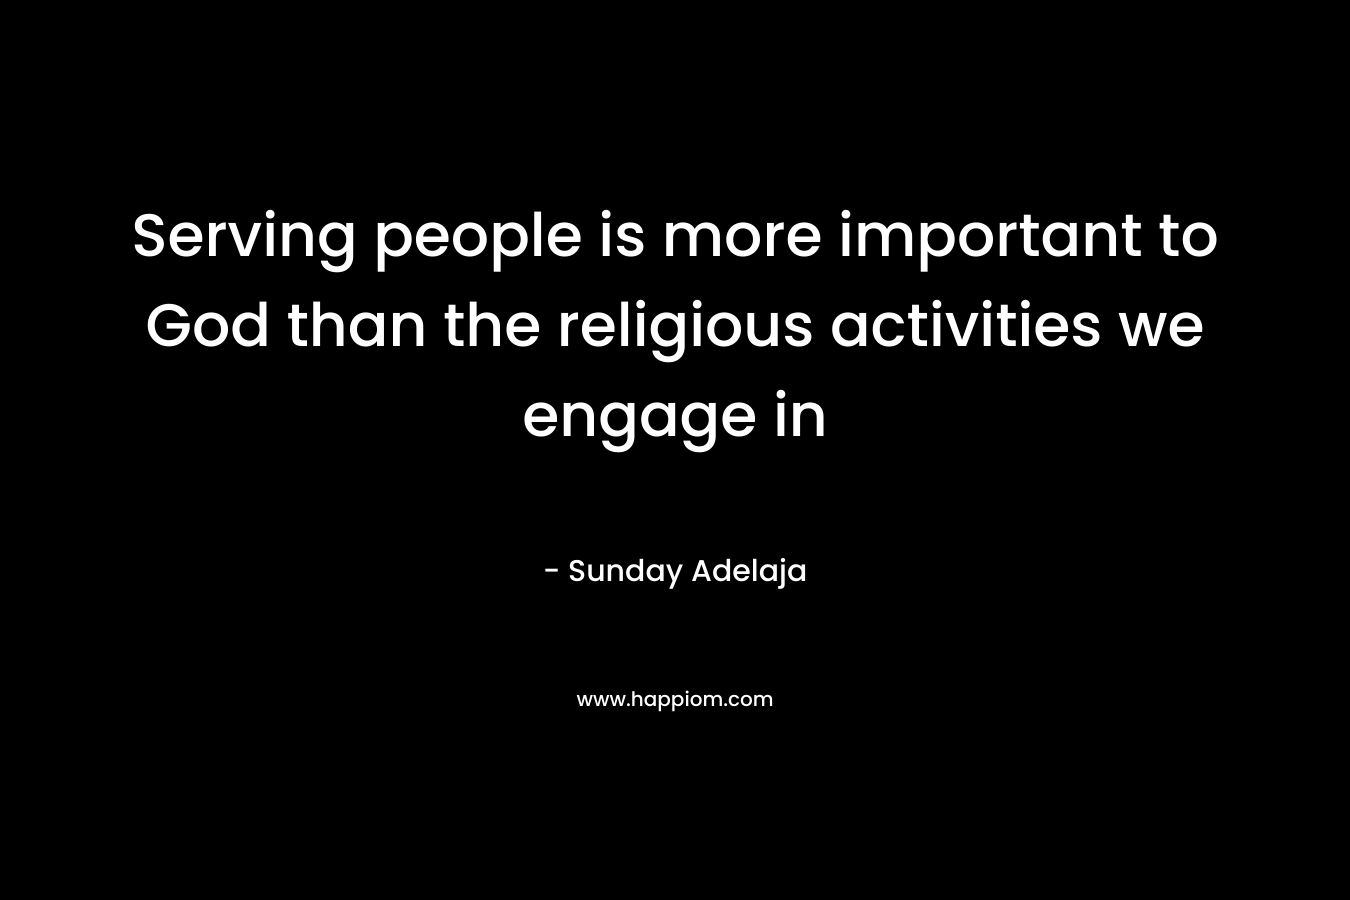 Serving people is more important to God than the religious activities we engage in